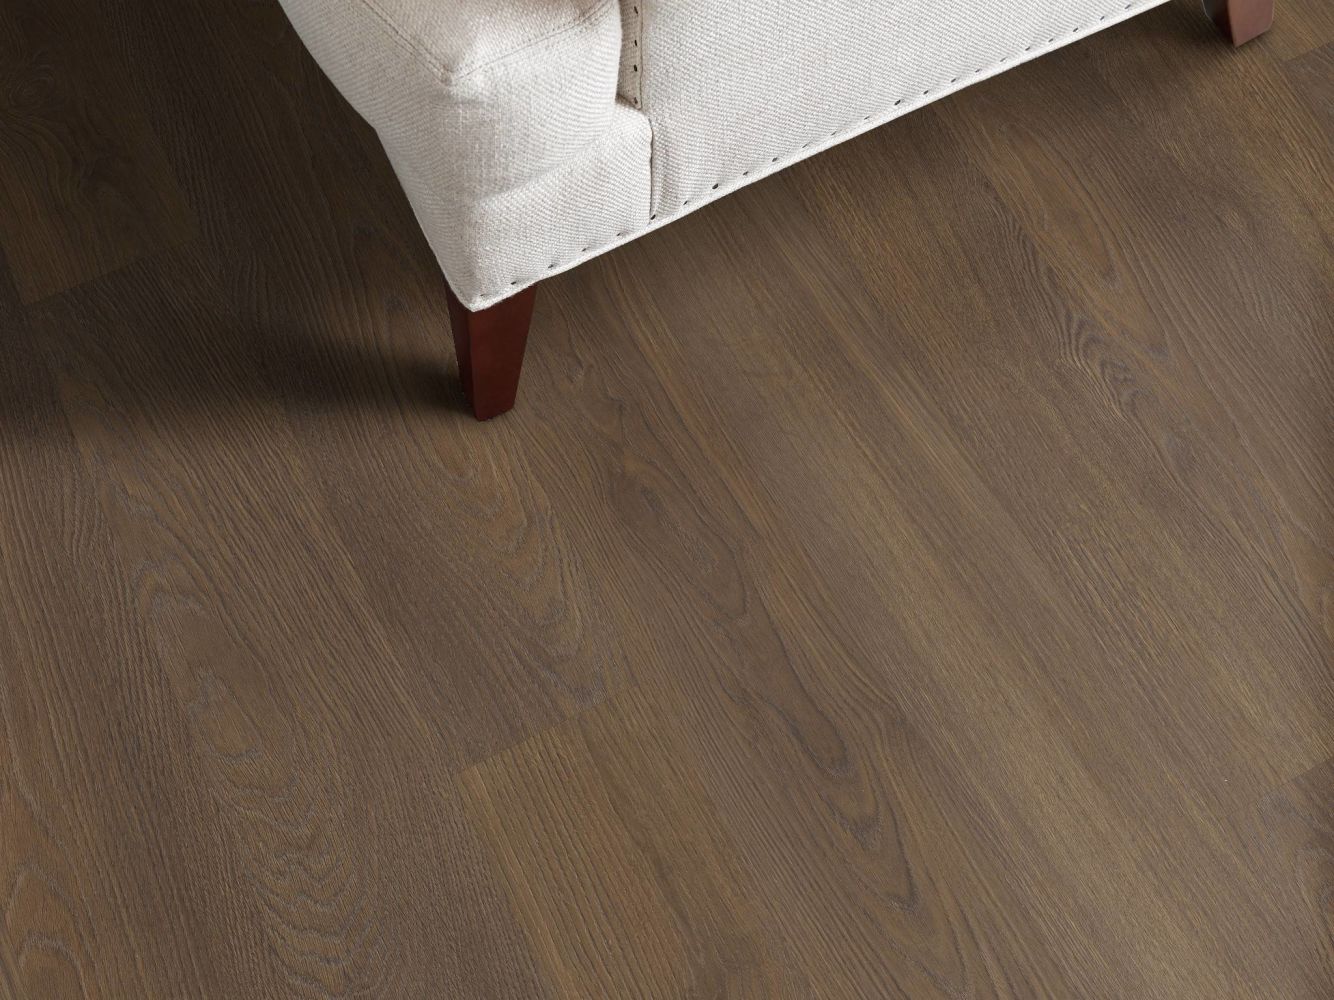 Shaw Floors Century Homes Kinsdale Tranquil 07725_C405H